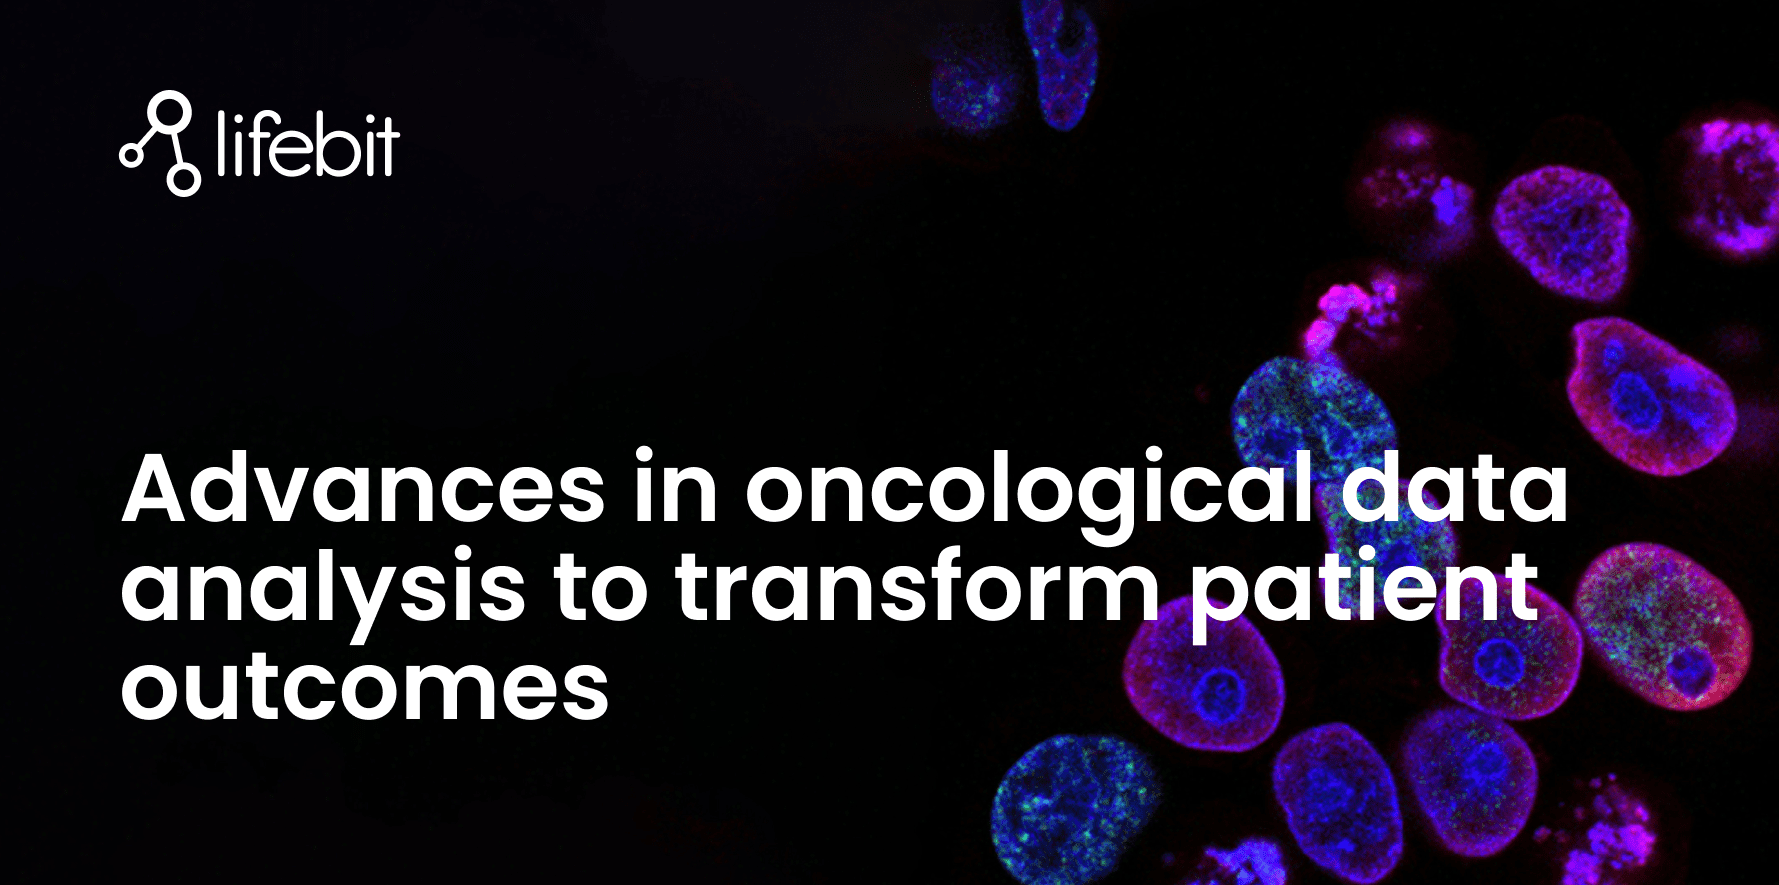 Advances in oncological data analysis to transform patient outcomes